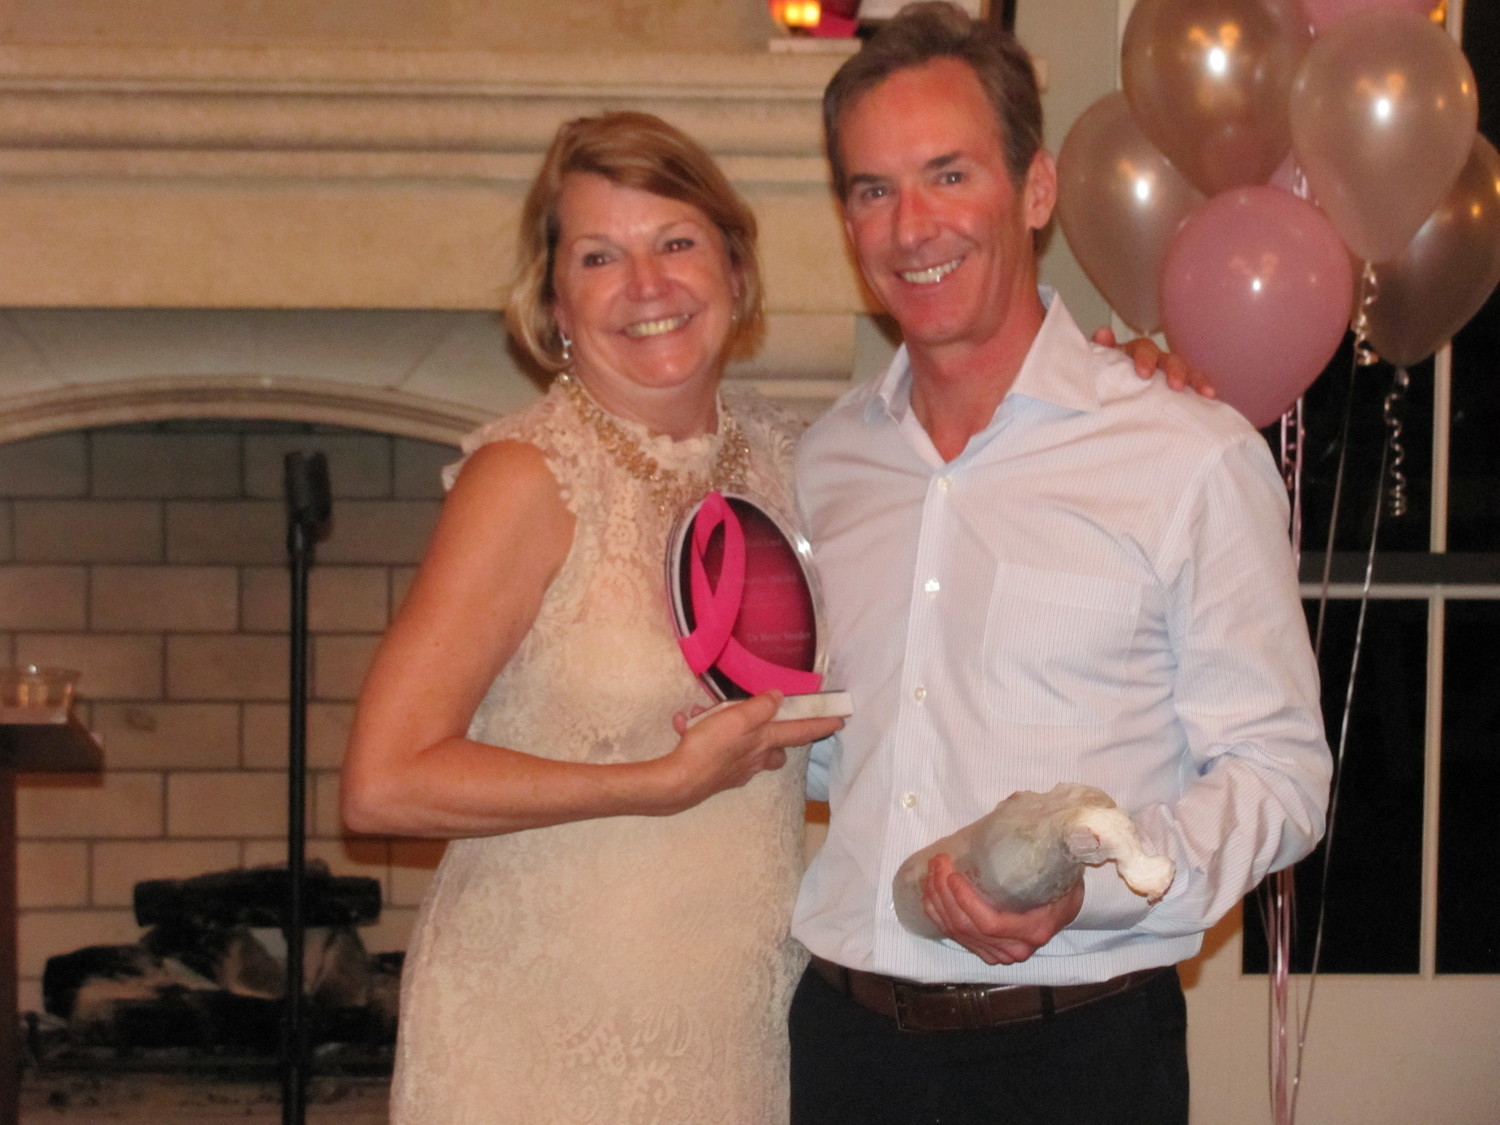 Linda Adams presents the CancerKare’s first “Breasty” award to Ponte Vedra Plastic Surgery’s Dr. Brett Snyder, who performed Linda’s reconstructive surgery following her mastectomy and guided her through aftercare, surgery and recovery